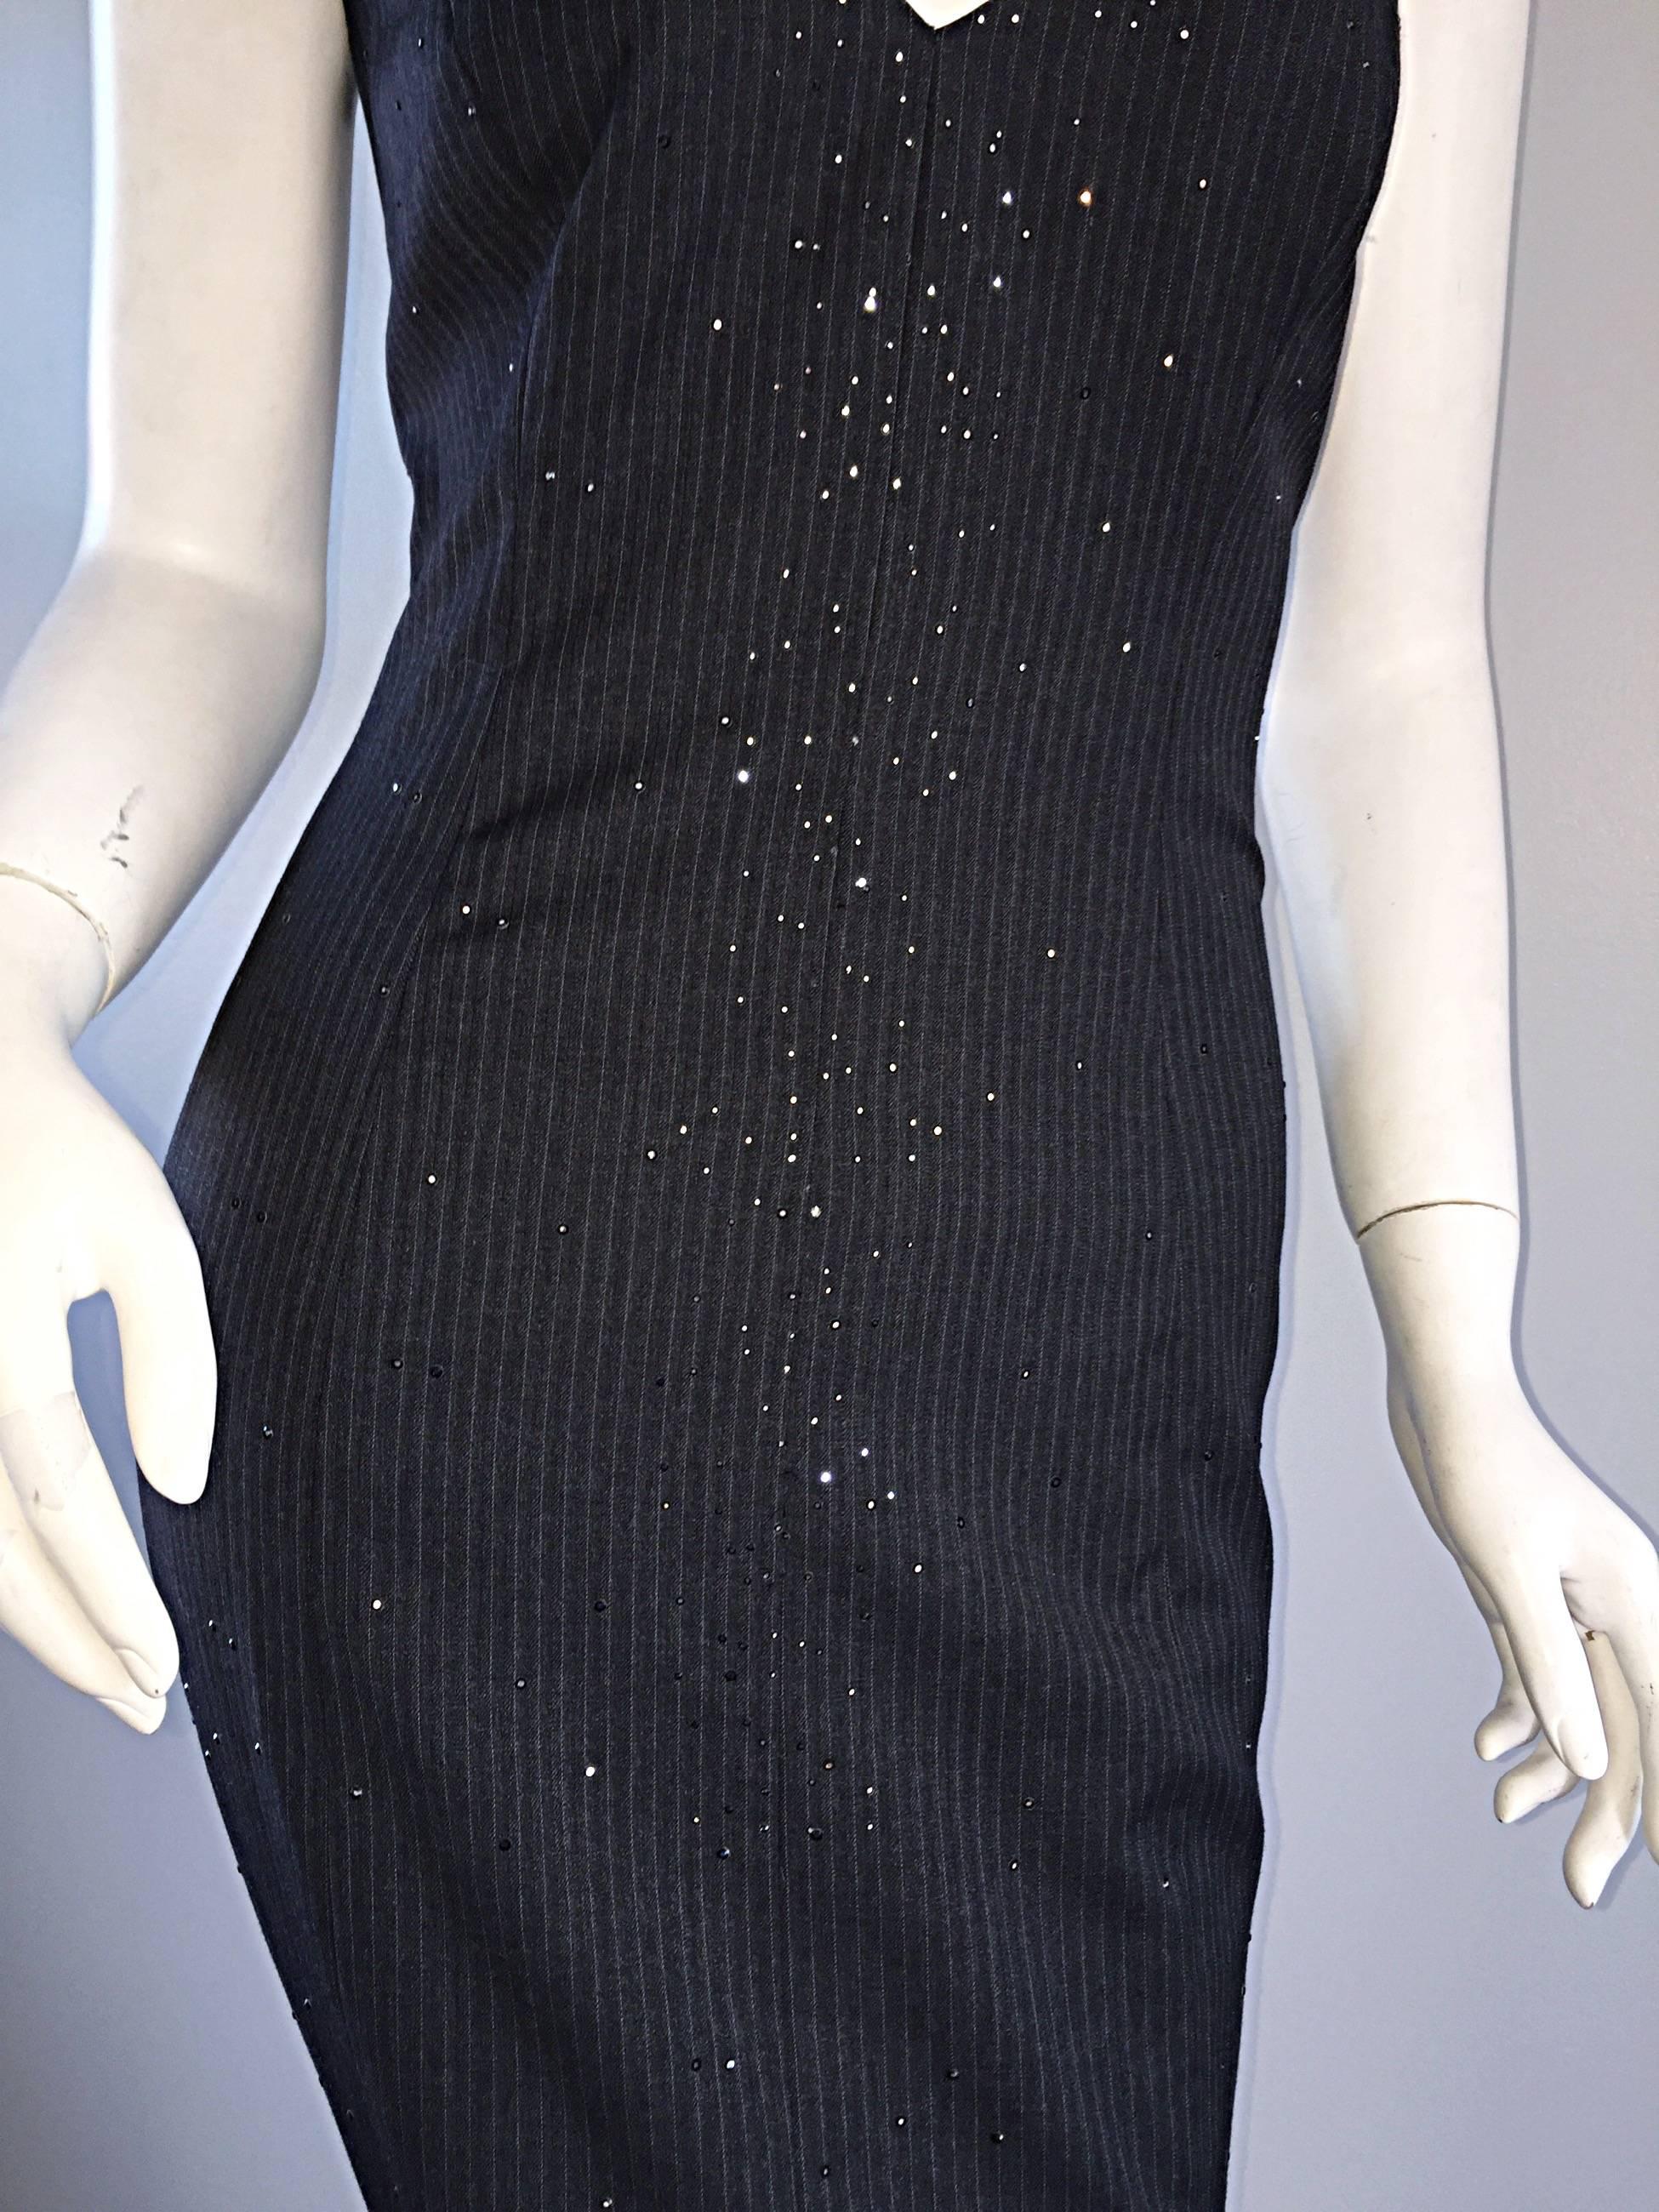 Exquisite Vintage James Purcell BNWT $2, 300 Gray Pinstripe Dress Black Crystals For Sale 5